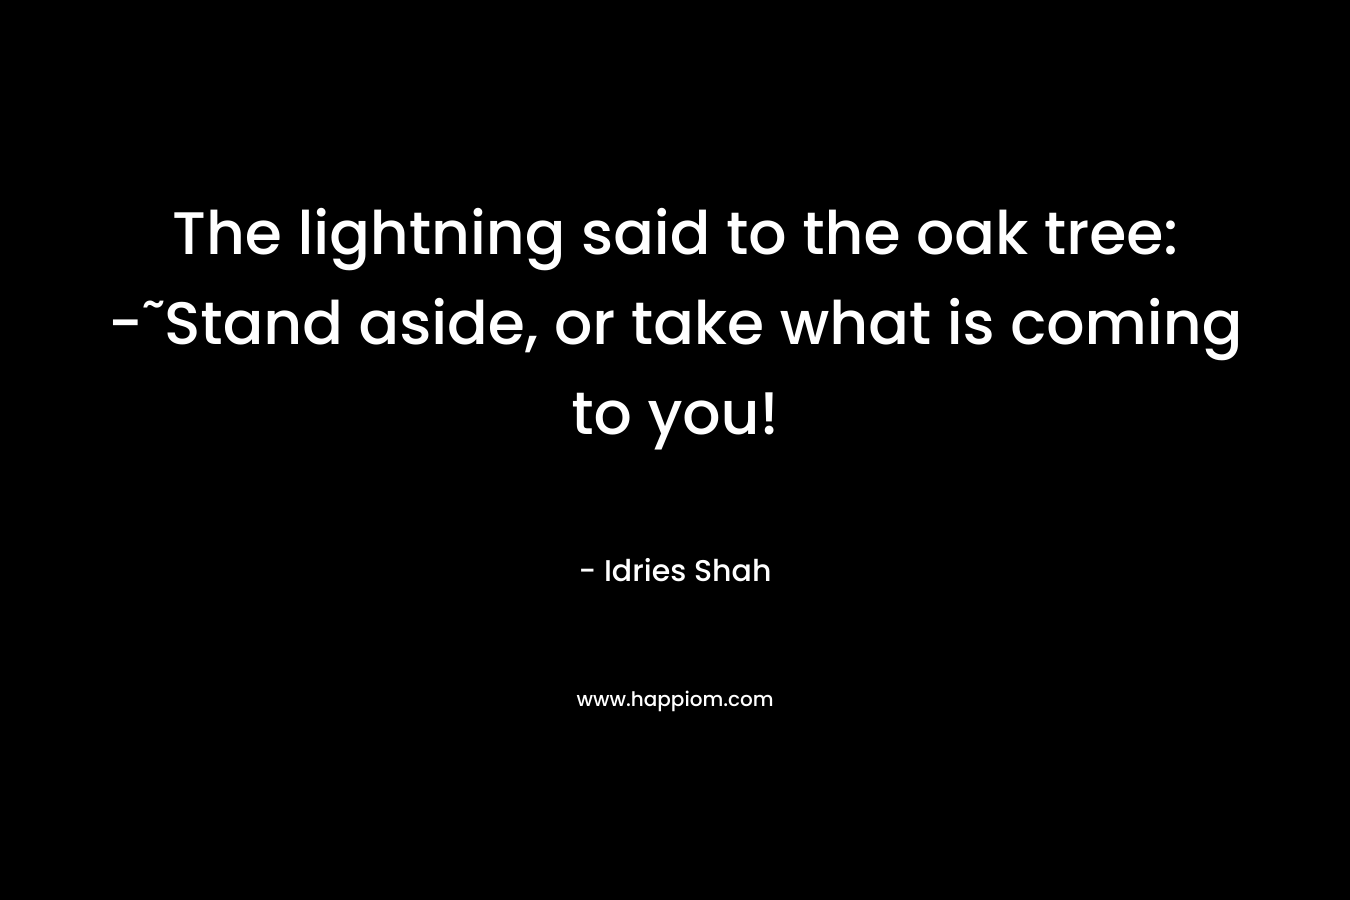 The lightning said to the oak tree: -˜Stand aside, or take what is coming to you!